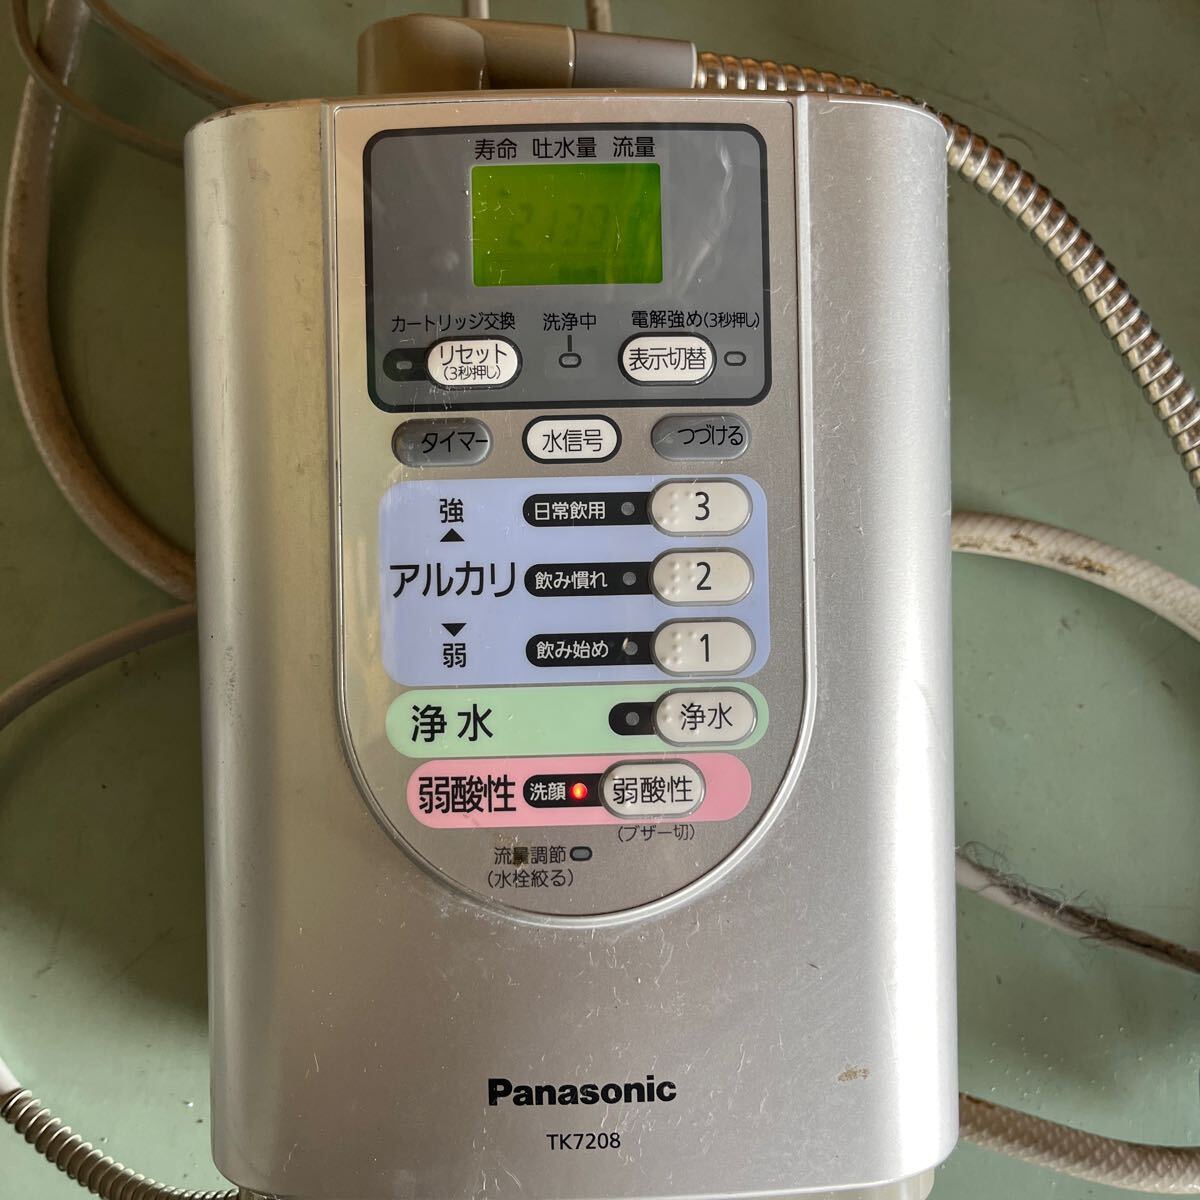 Panasonic Panasonic water ionizer TK7208 continuation type electrolysis aquatic . vessel water purifier water filter used present condition goods 